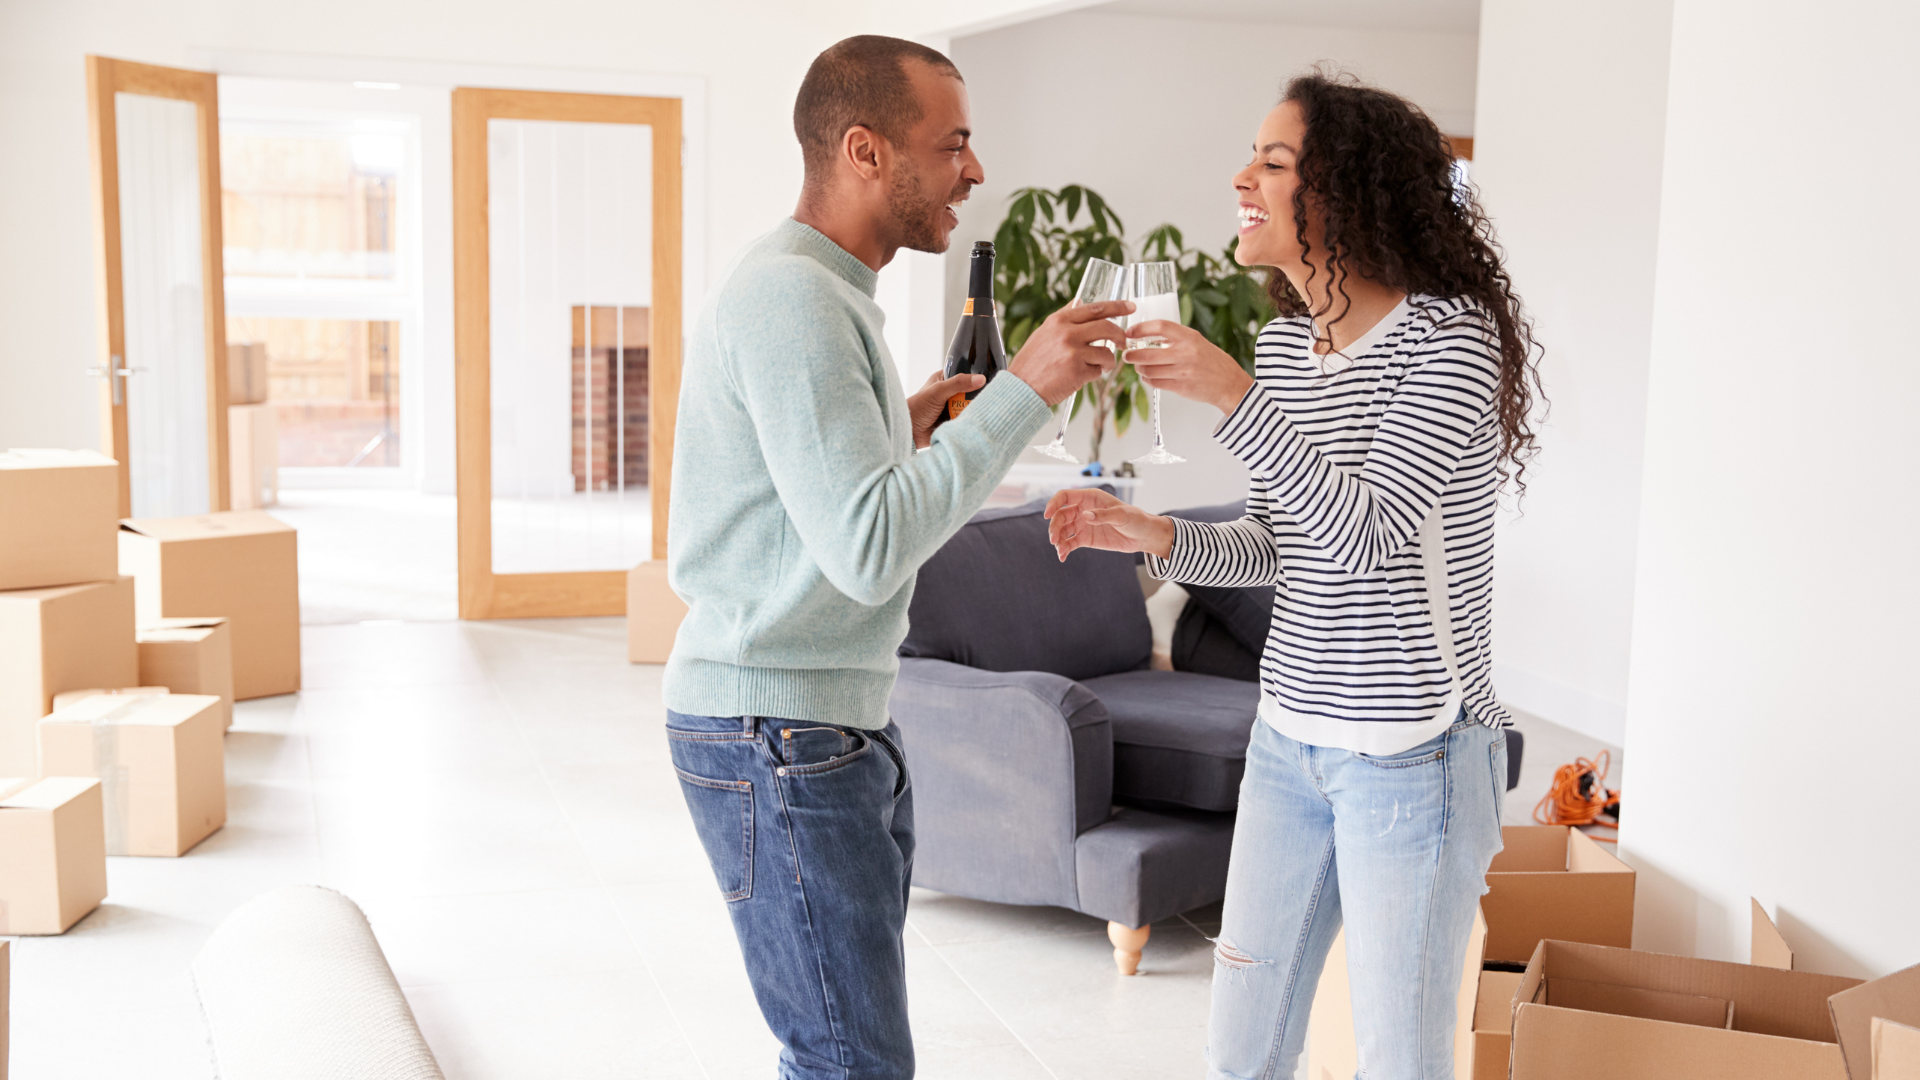 Couple Celebrates Buying A Home By Toasting Champagne In Their New Living Room